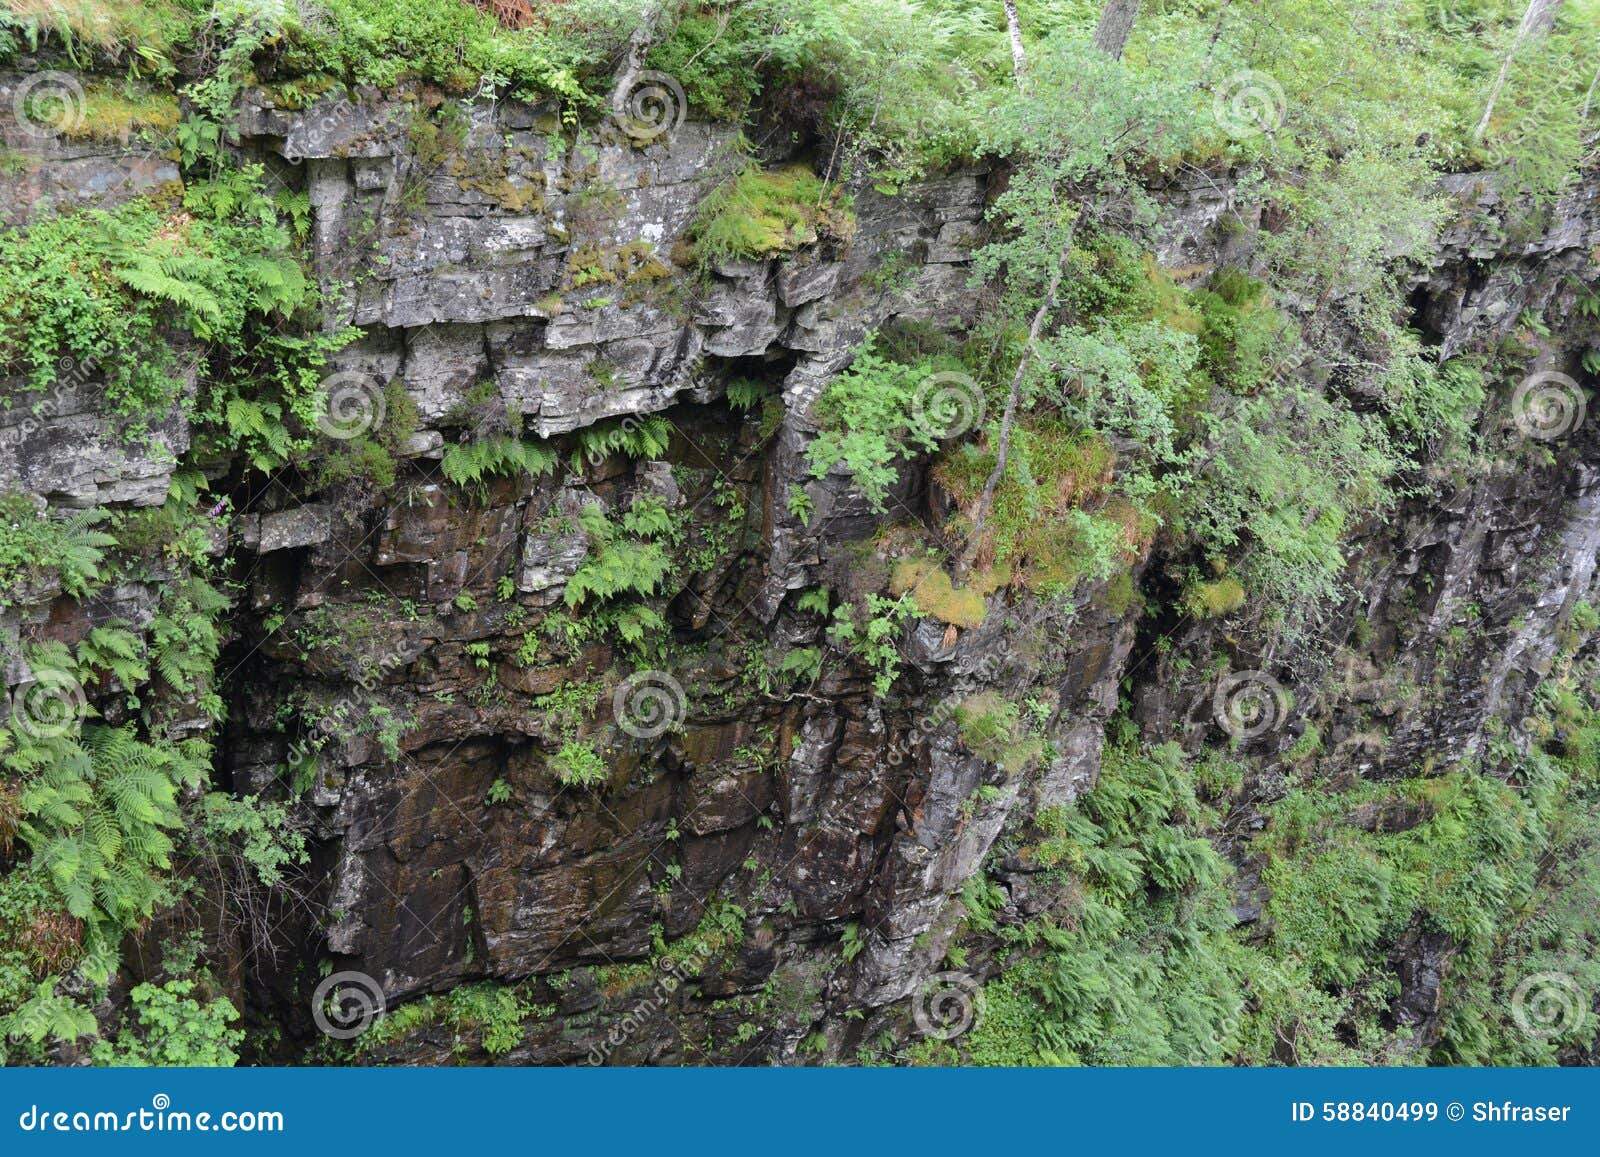 moine schist rocks on sidewall of gorge, ferns and trees